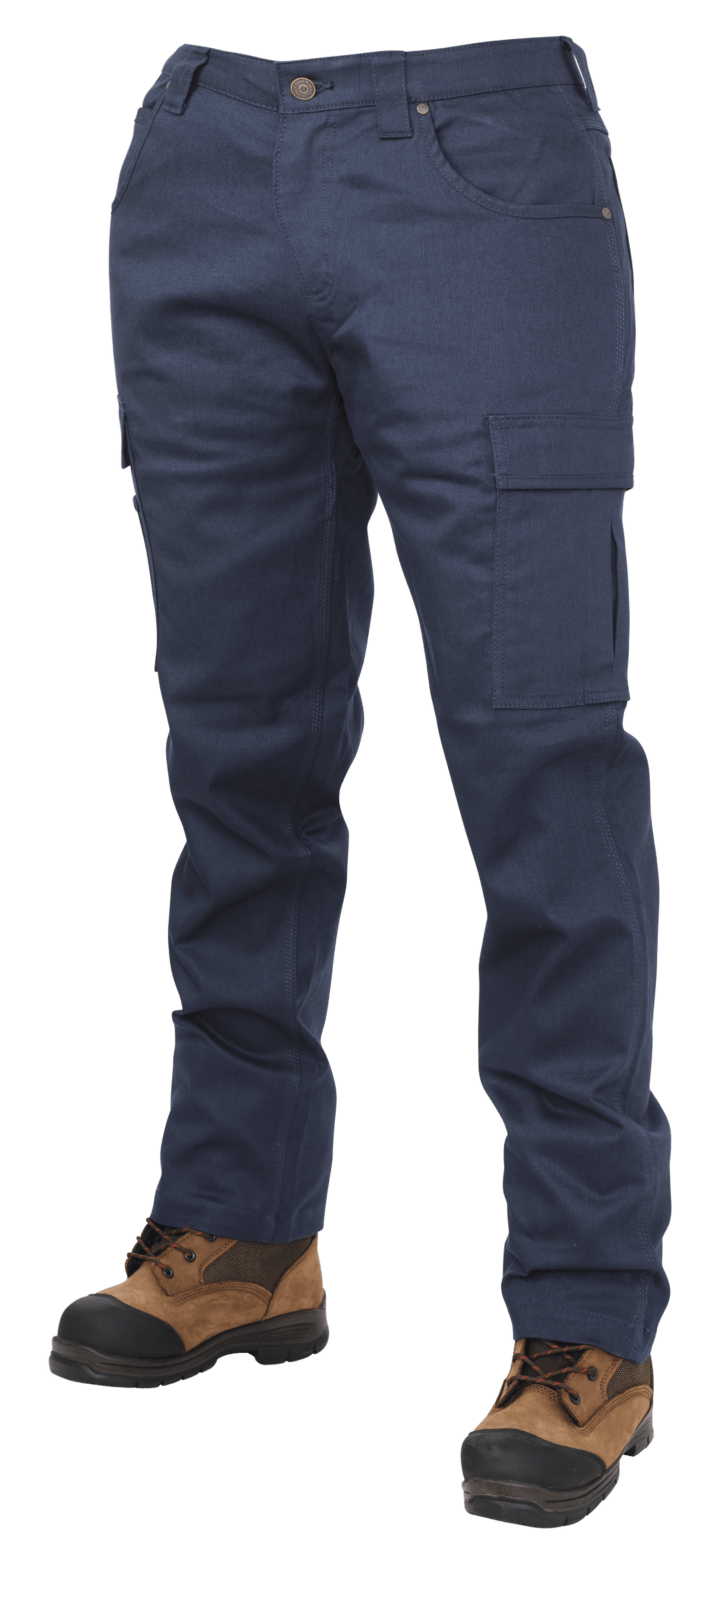 https://womensworkwear.ca/wp-content/uploads/2021/12/WP10-GARMENT-NAVY-FRONT.png